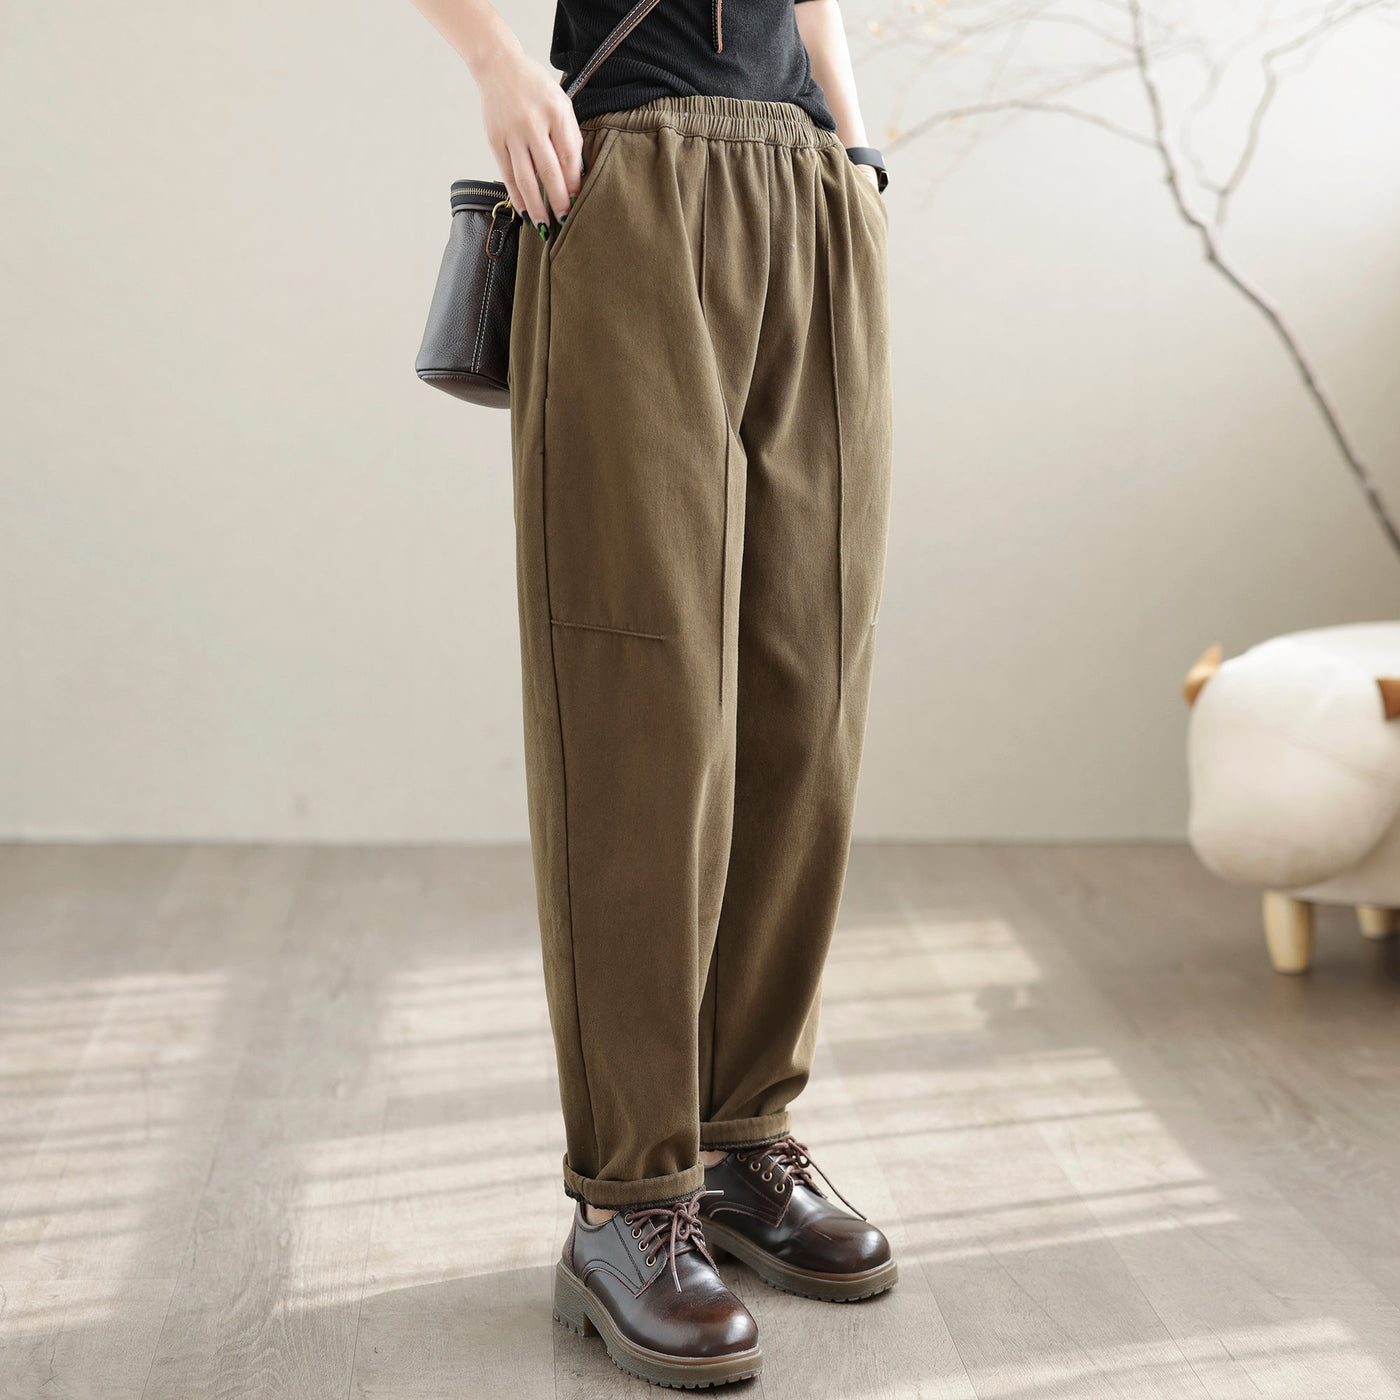 Women Casual Loose Furred Cotton Winter Pants Oct 2022 New Arrival M Brown 